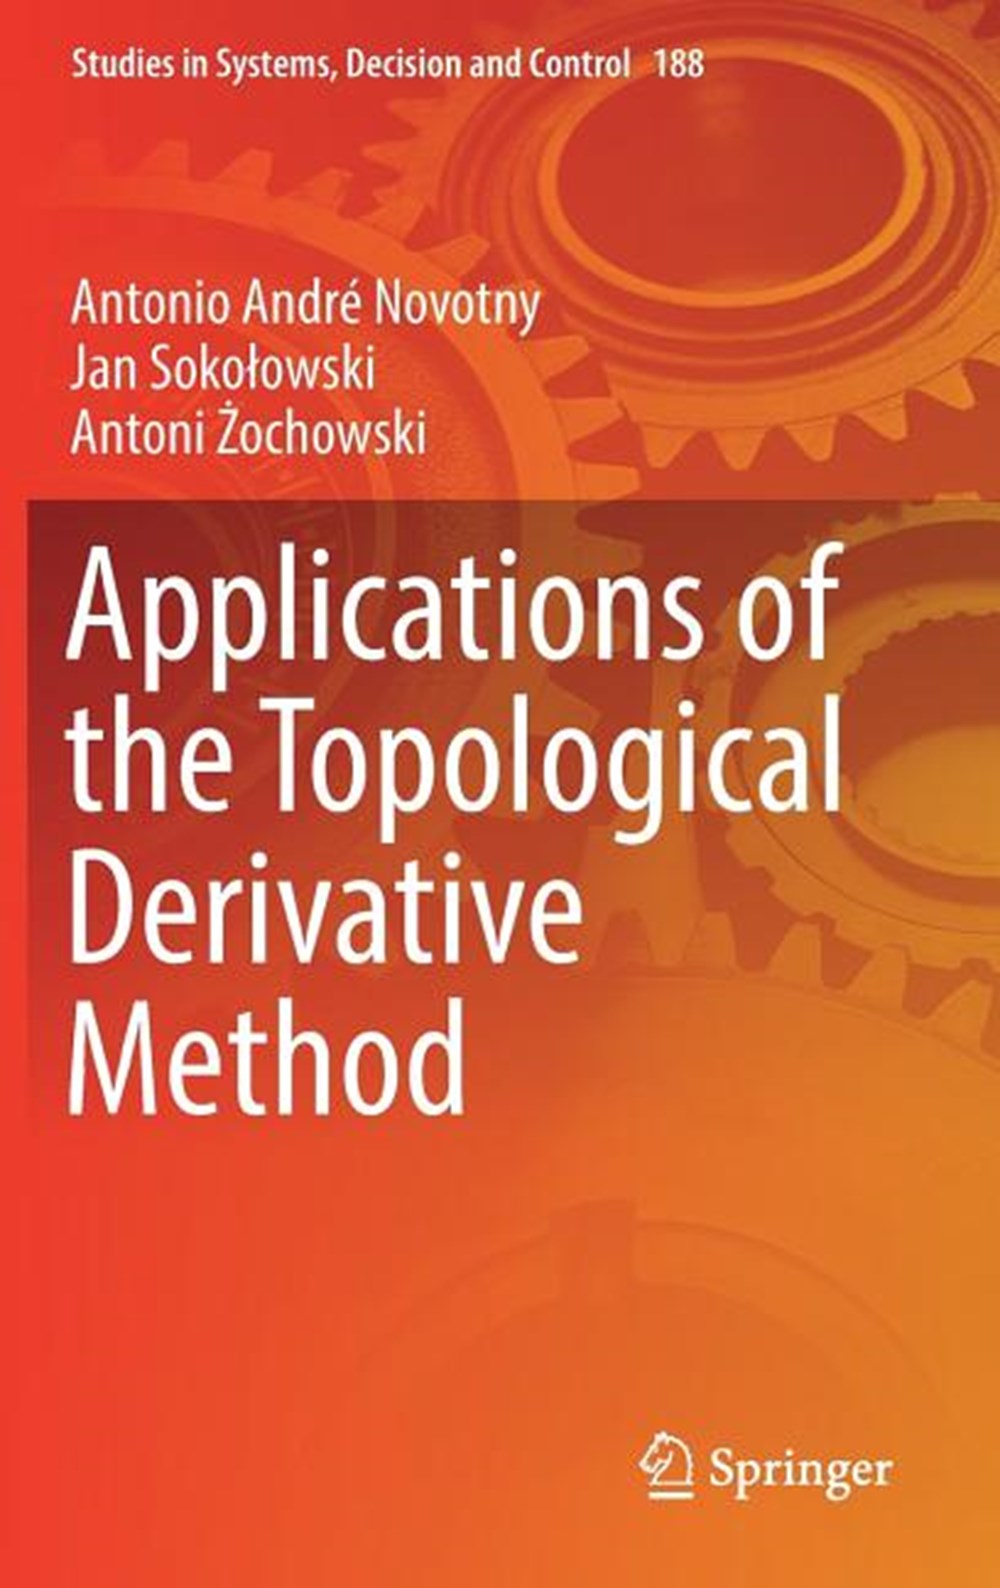 Applications of the Topological Derivative Method (2019)